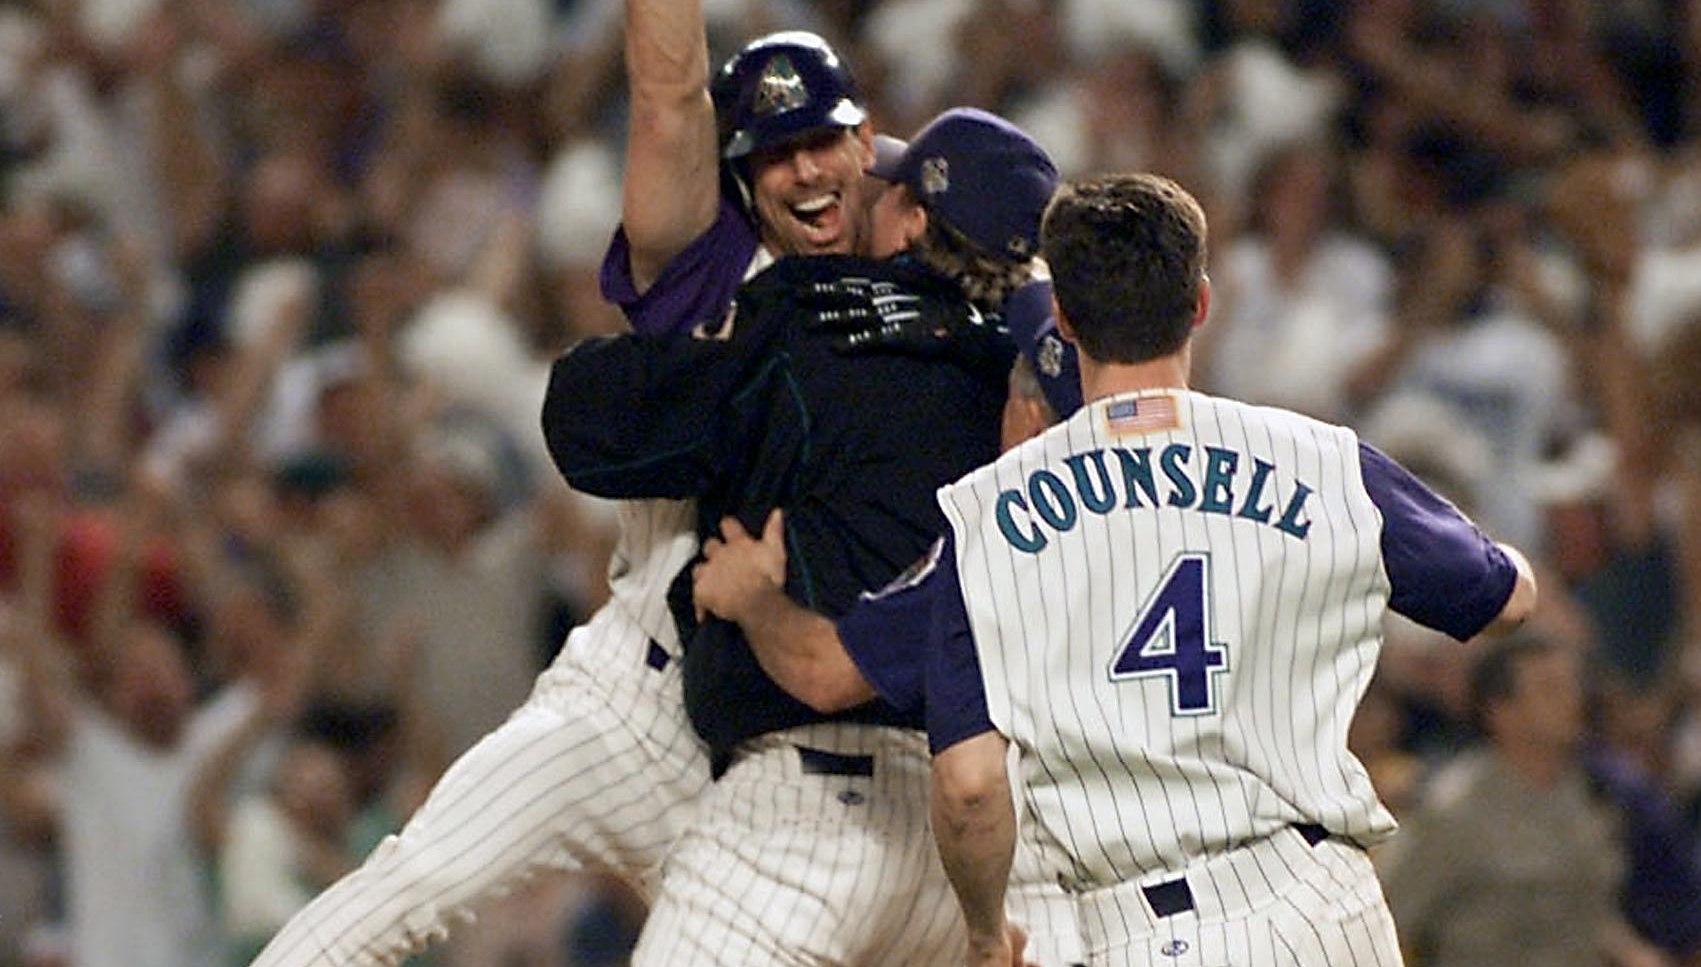 Baseball news Can this years MLB World Series live up to the incredible drama of 2001